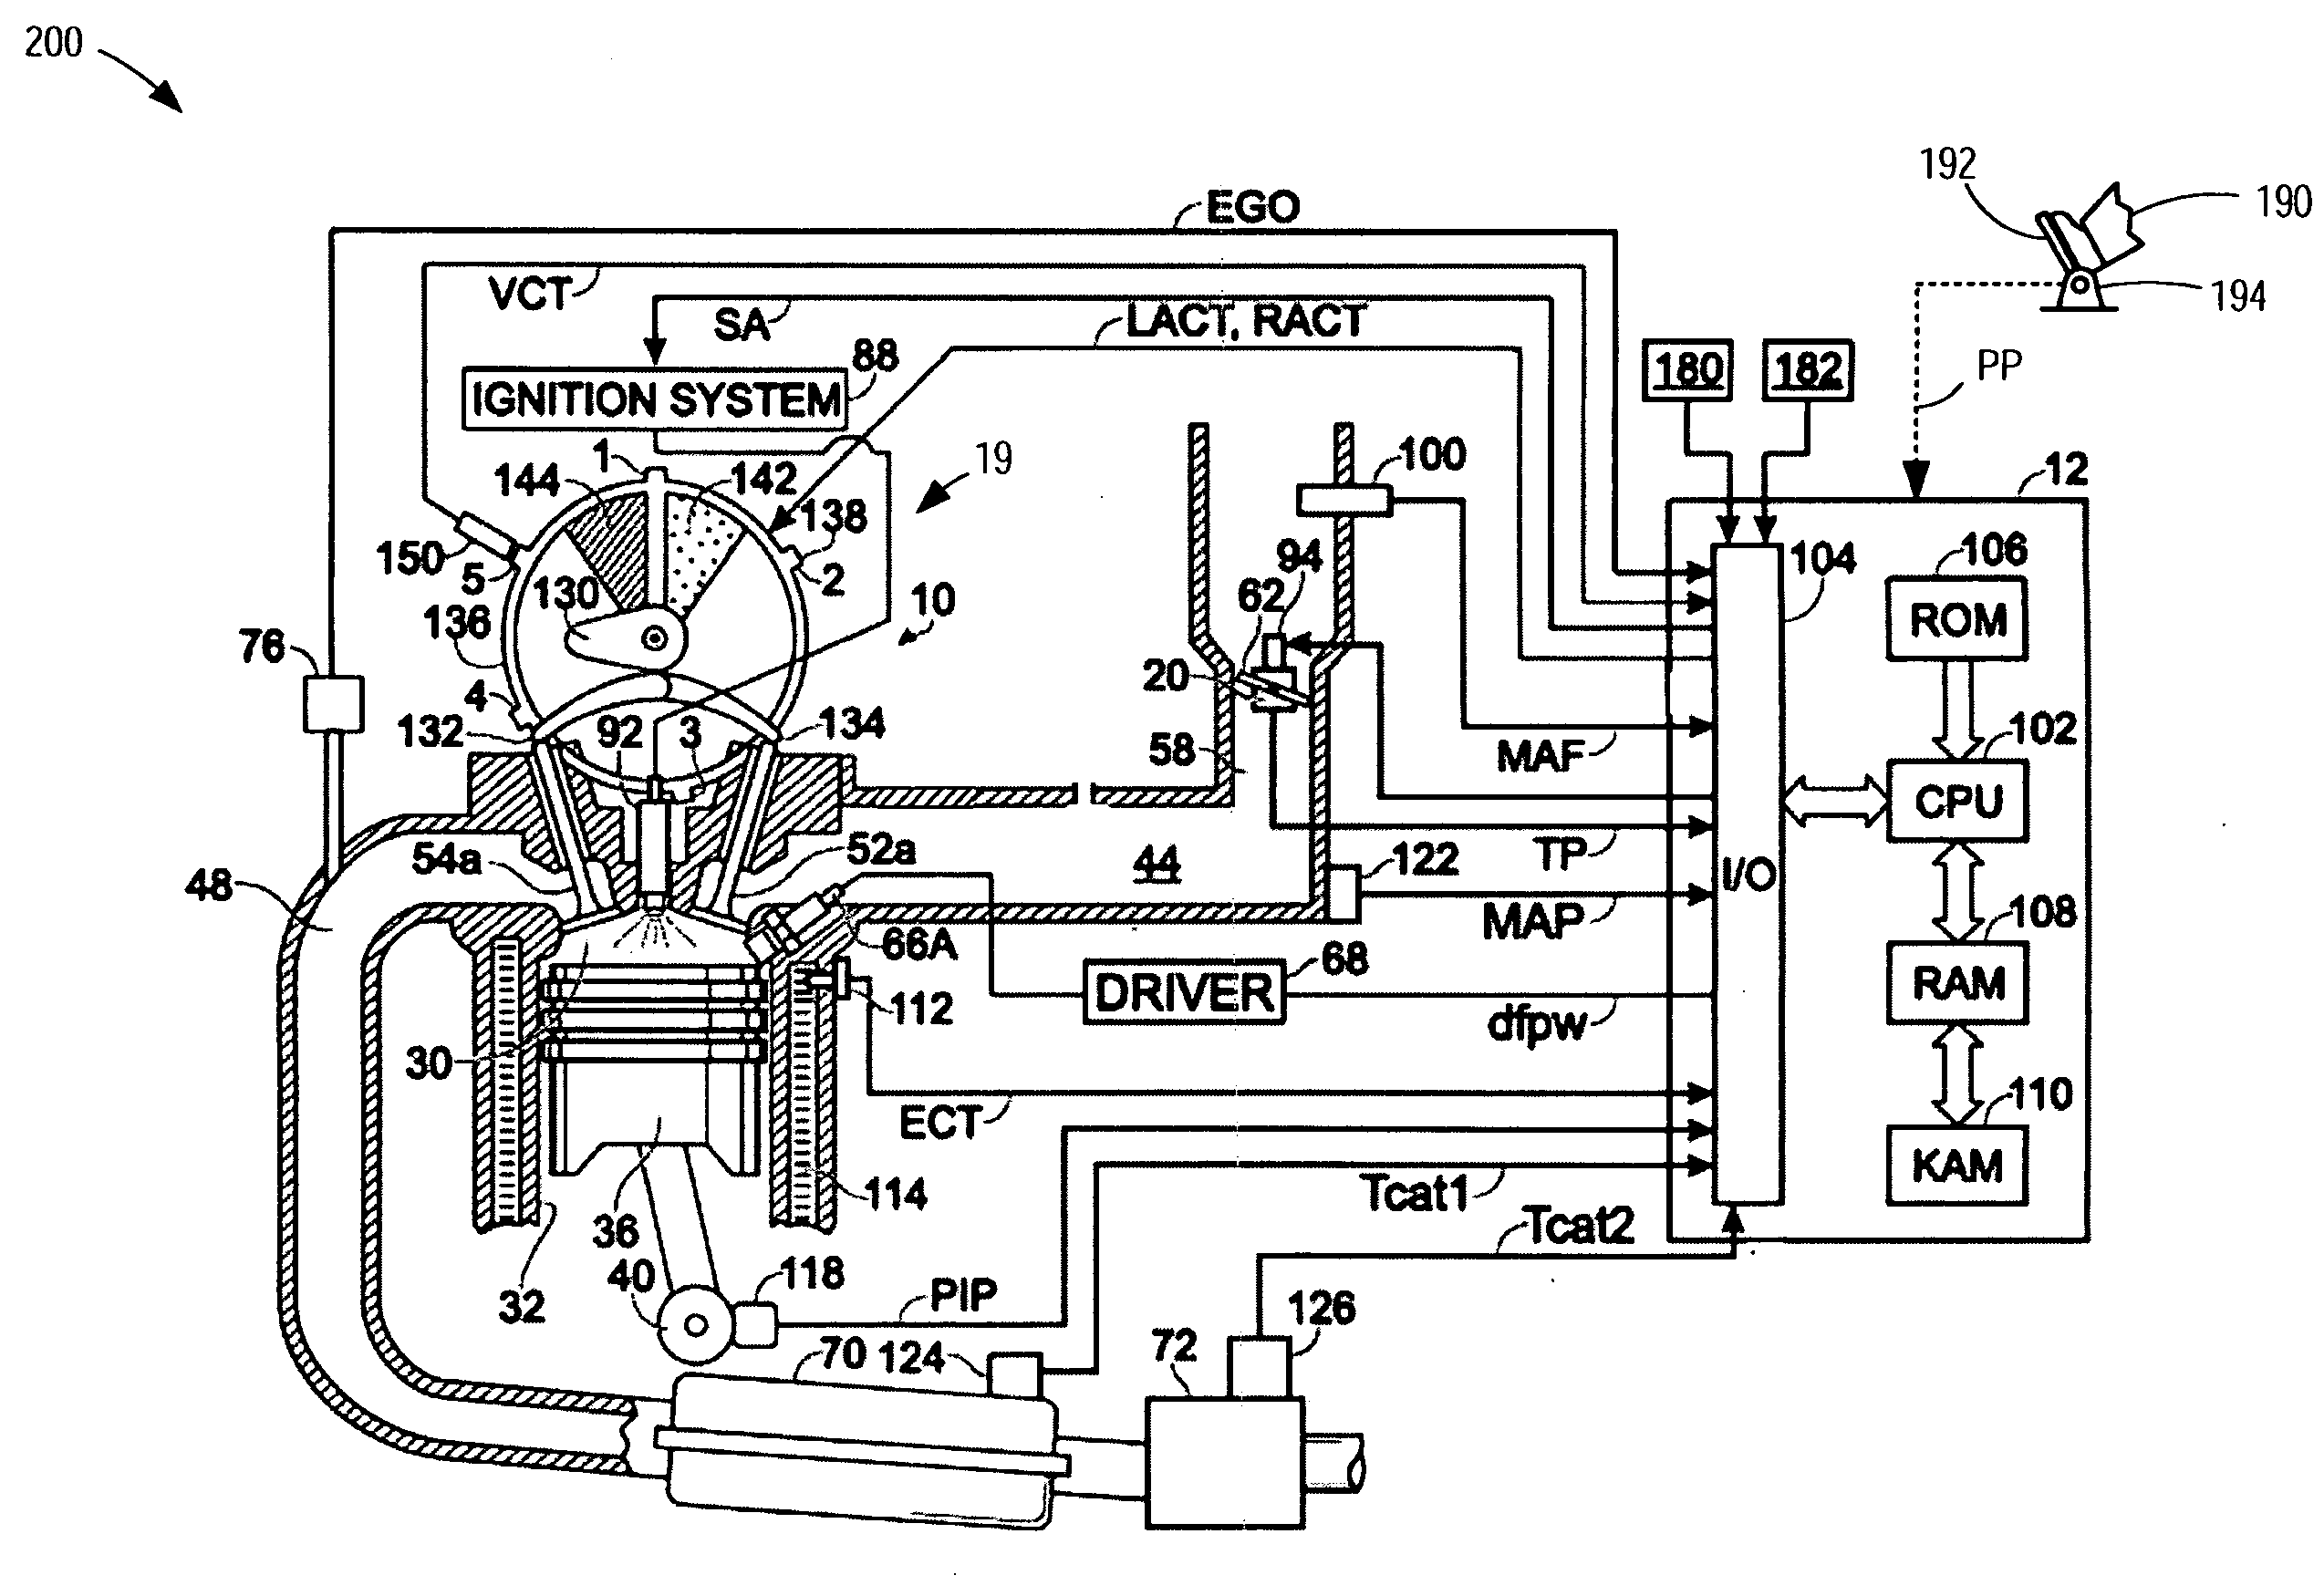 Coordination of variable cam timing and variable displacement engine systems